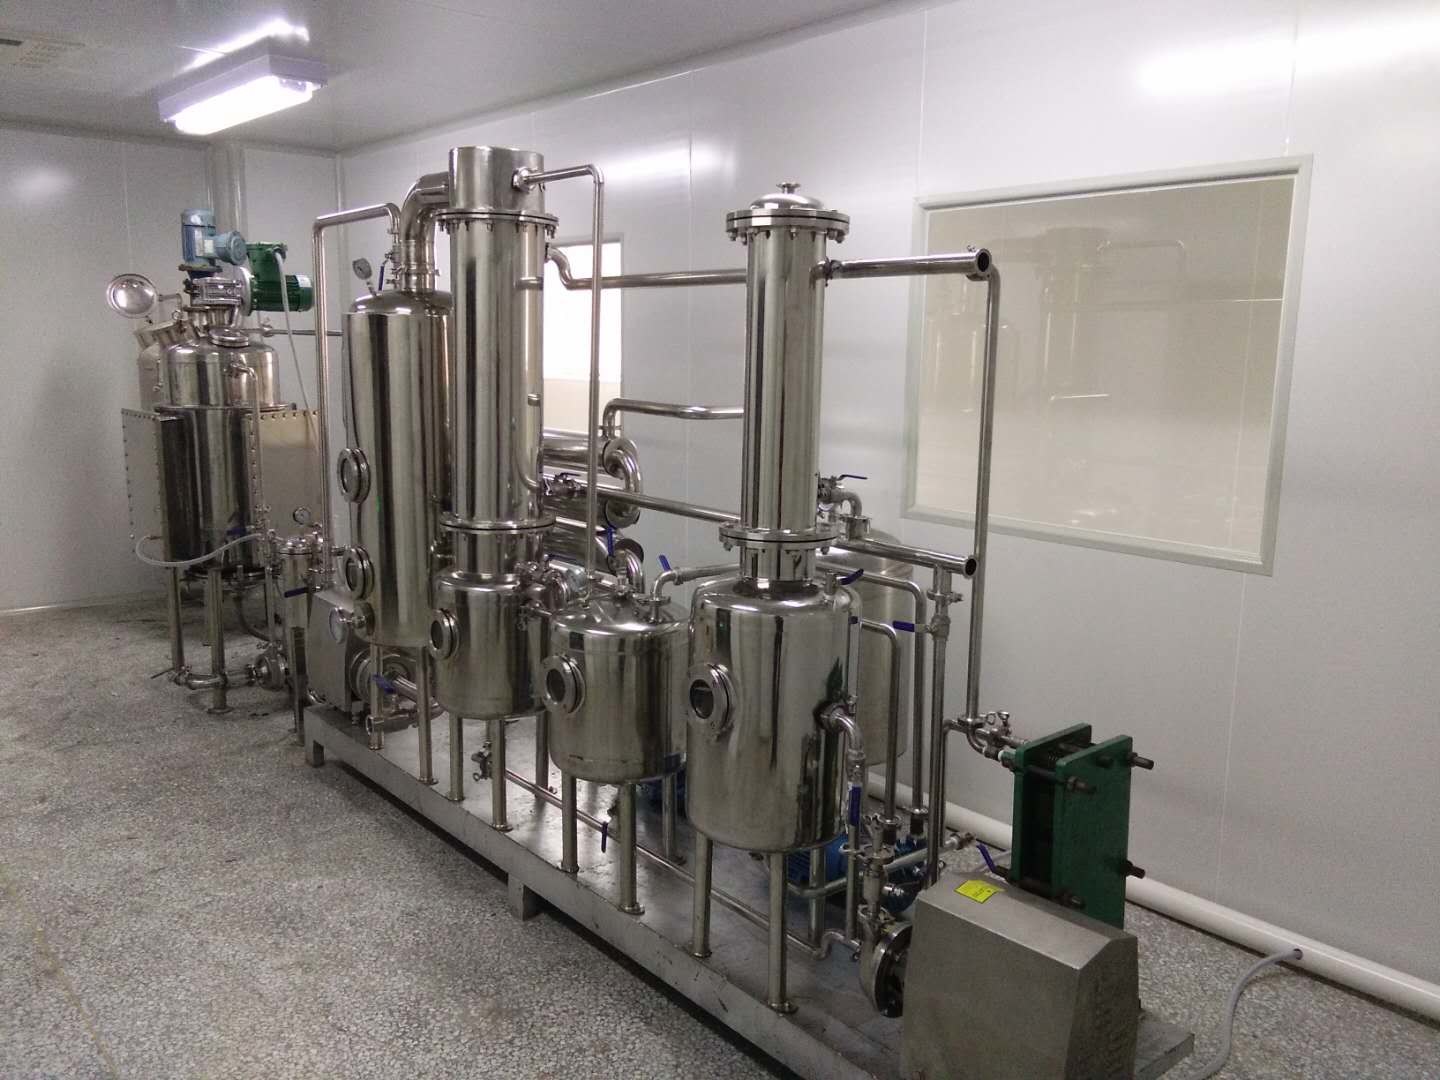  100L Ethanol Extractor Equipment for hemp CBD oil or Pharmaceuticals and chemicals Manufactures